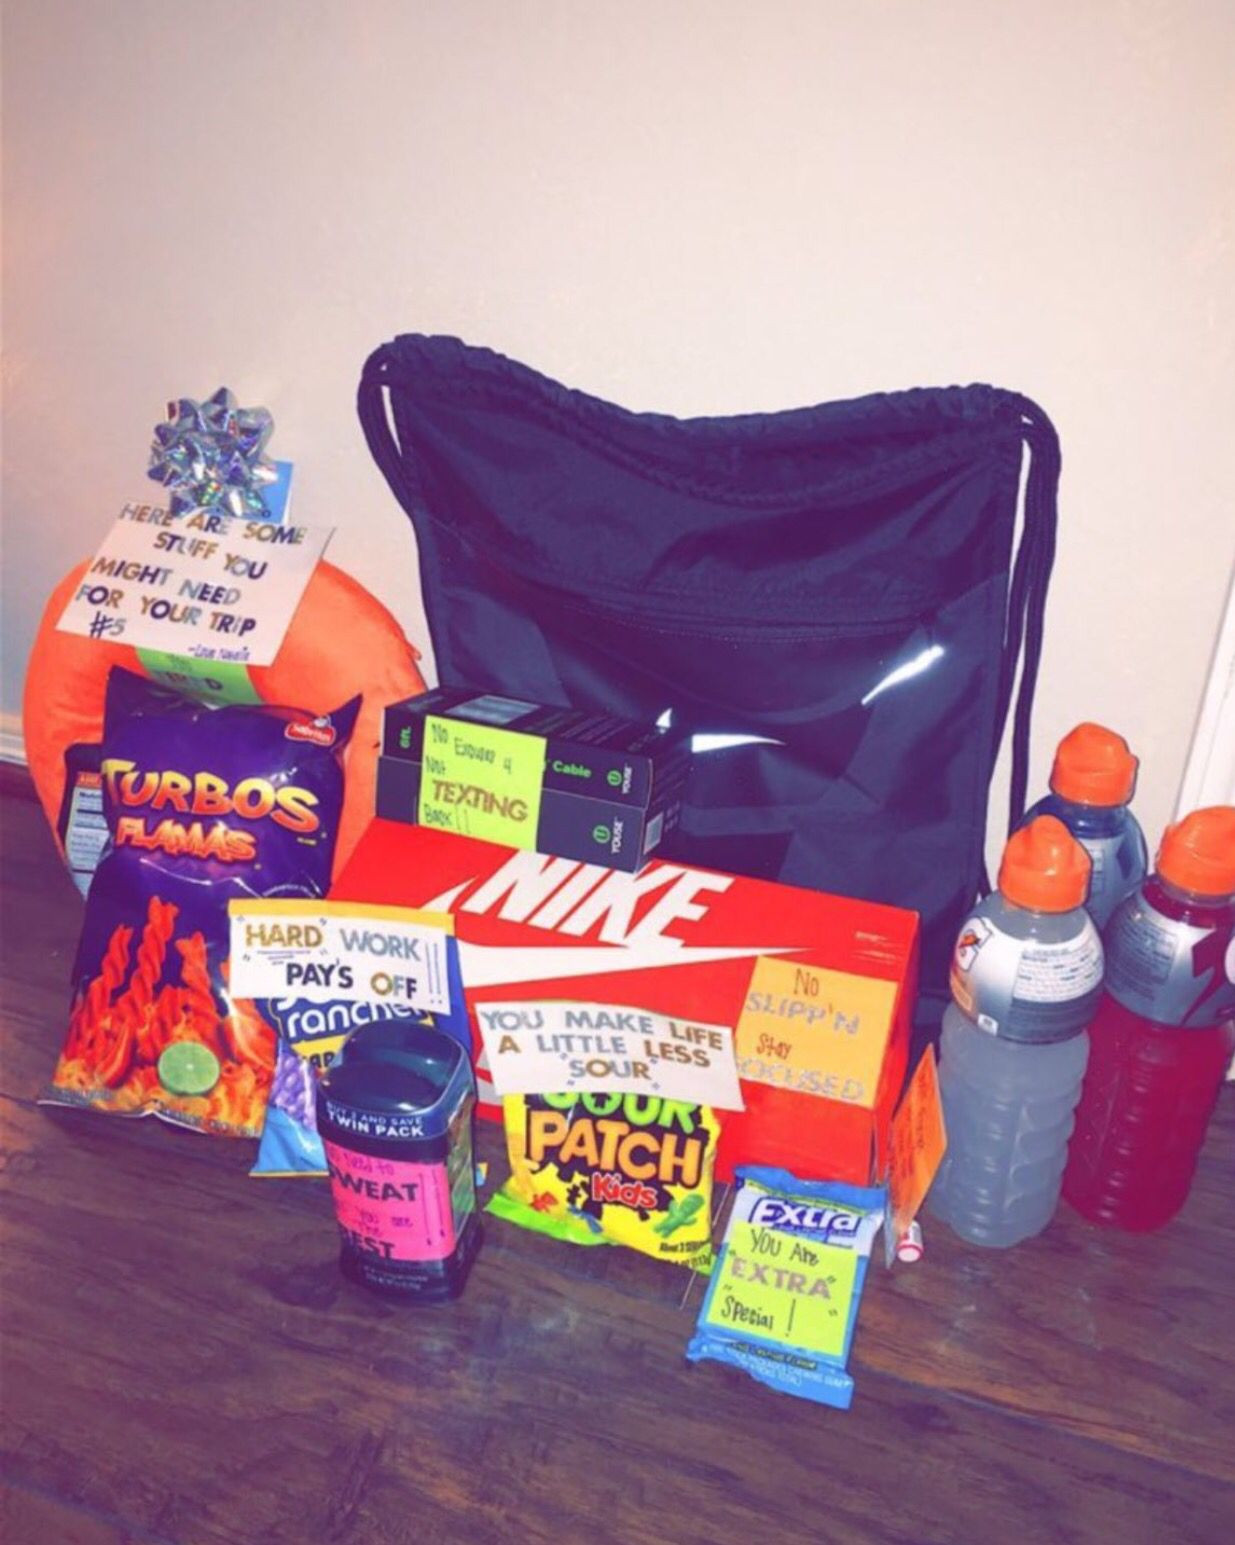 Basketball Gift Ideas For Boyfriend
 When he goes off to college